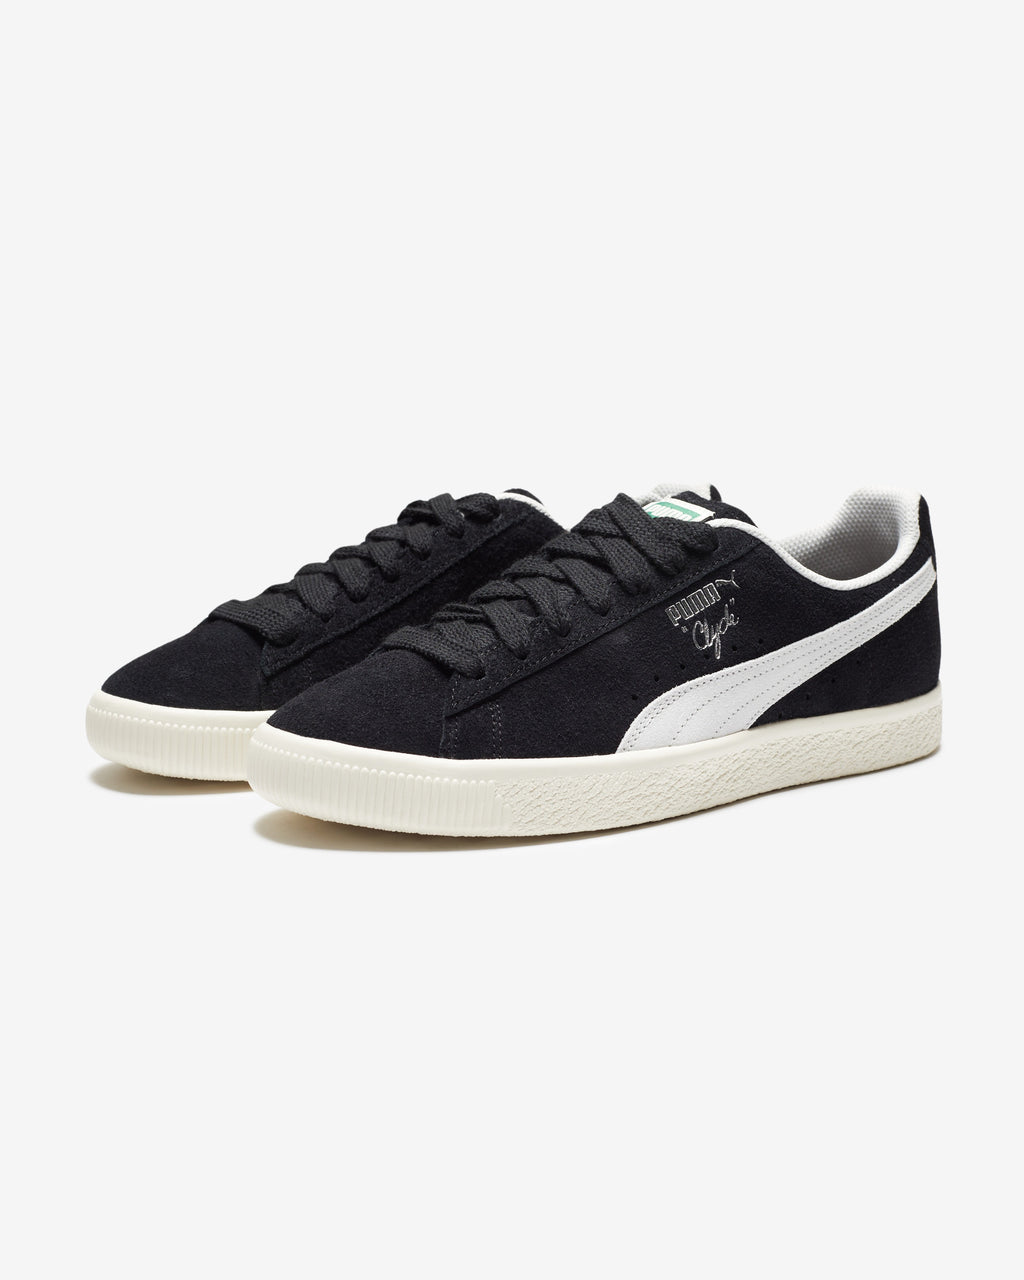 PUMA CLYDE HAIRY SUEDE - PUMABLACK/ FROSTEDIVORY